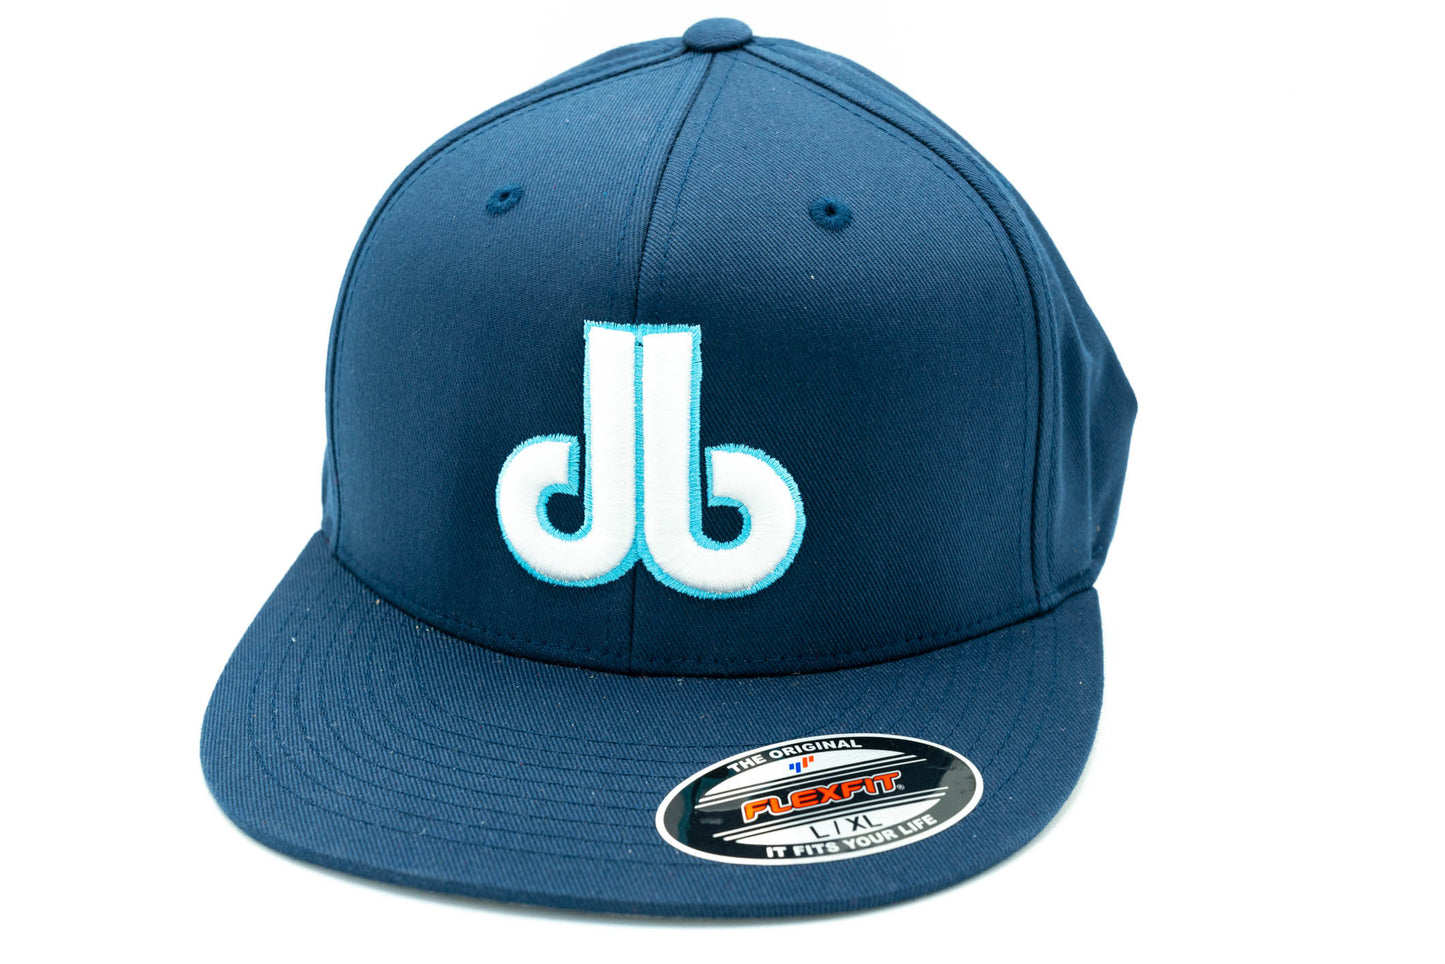 db Hat - Blue and Baby Blue